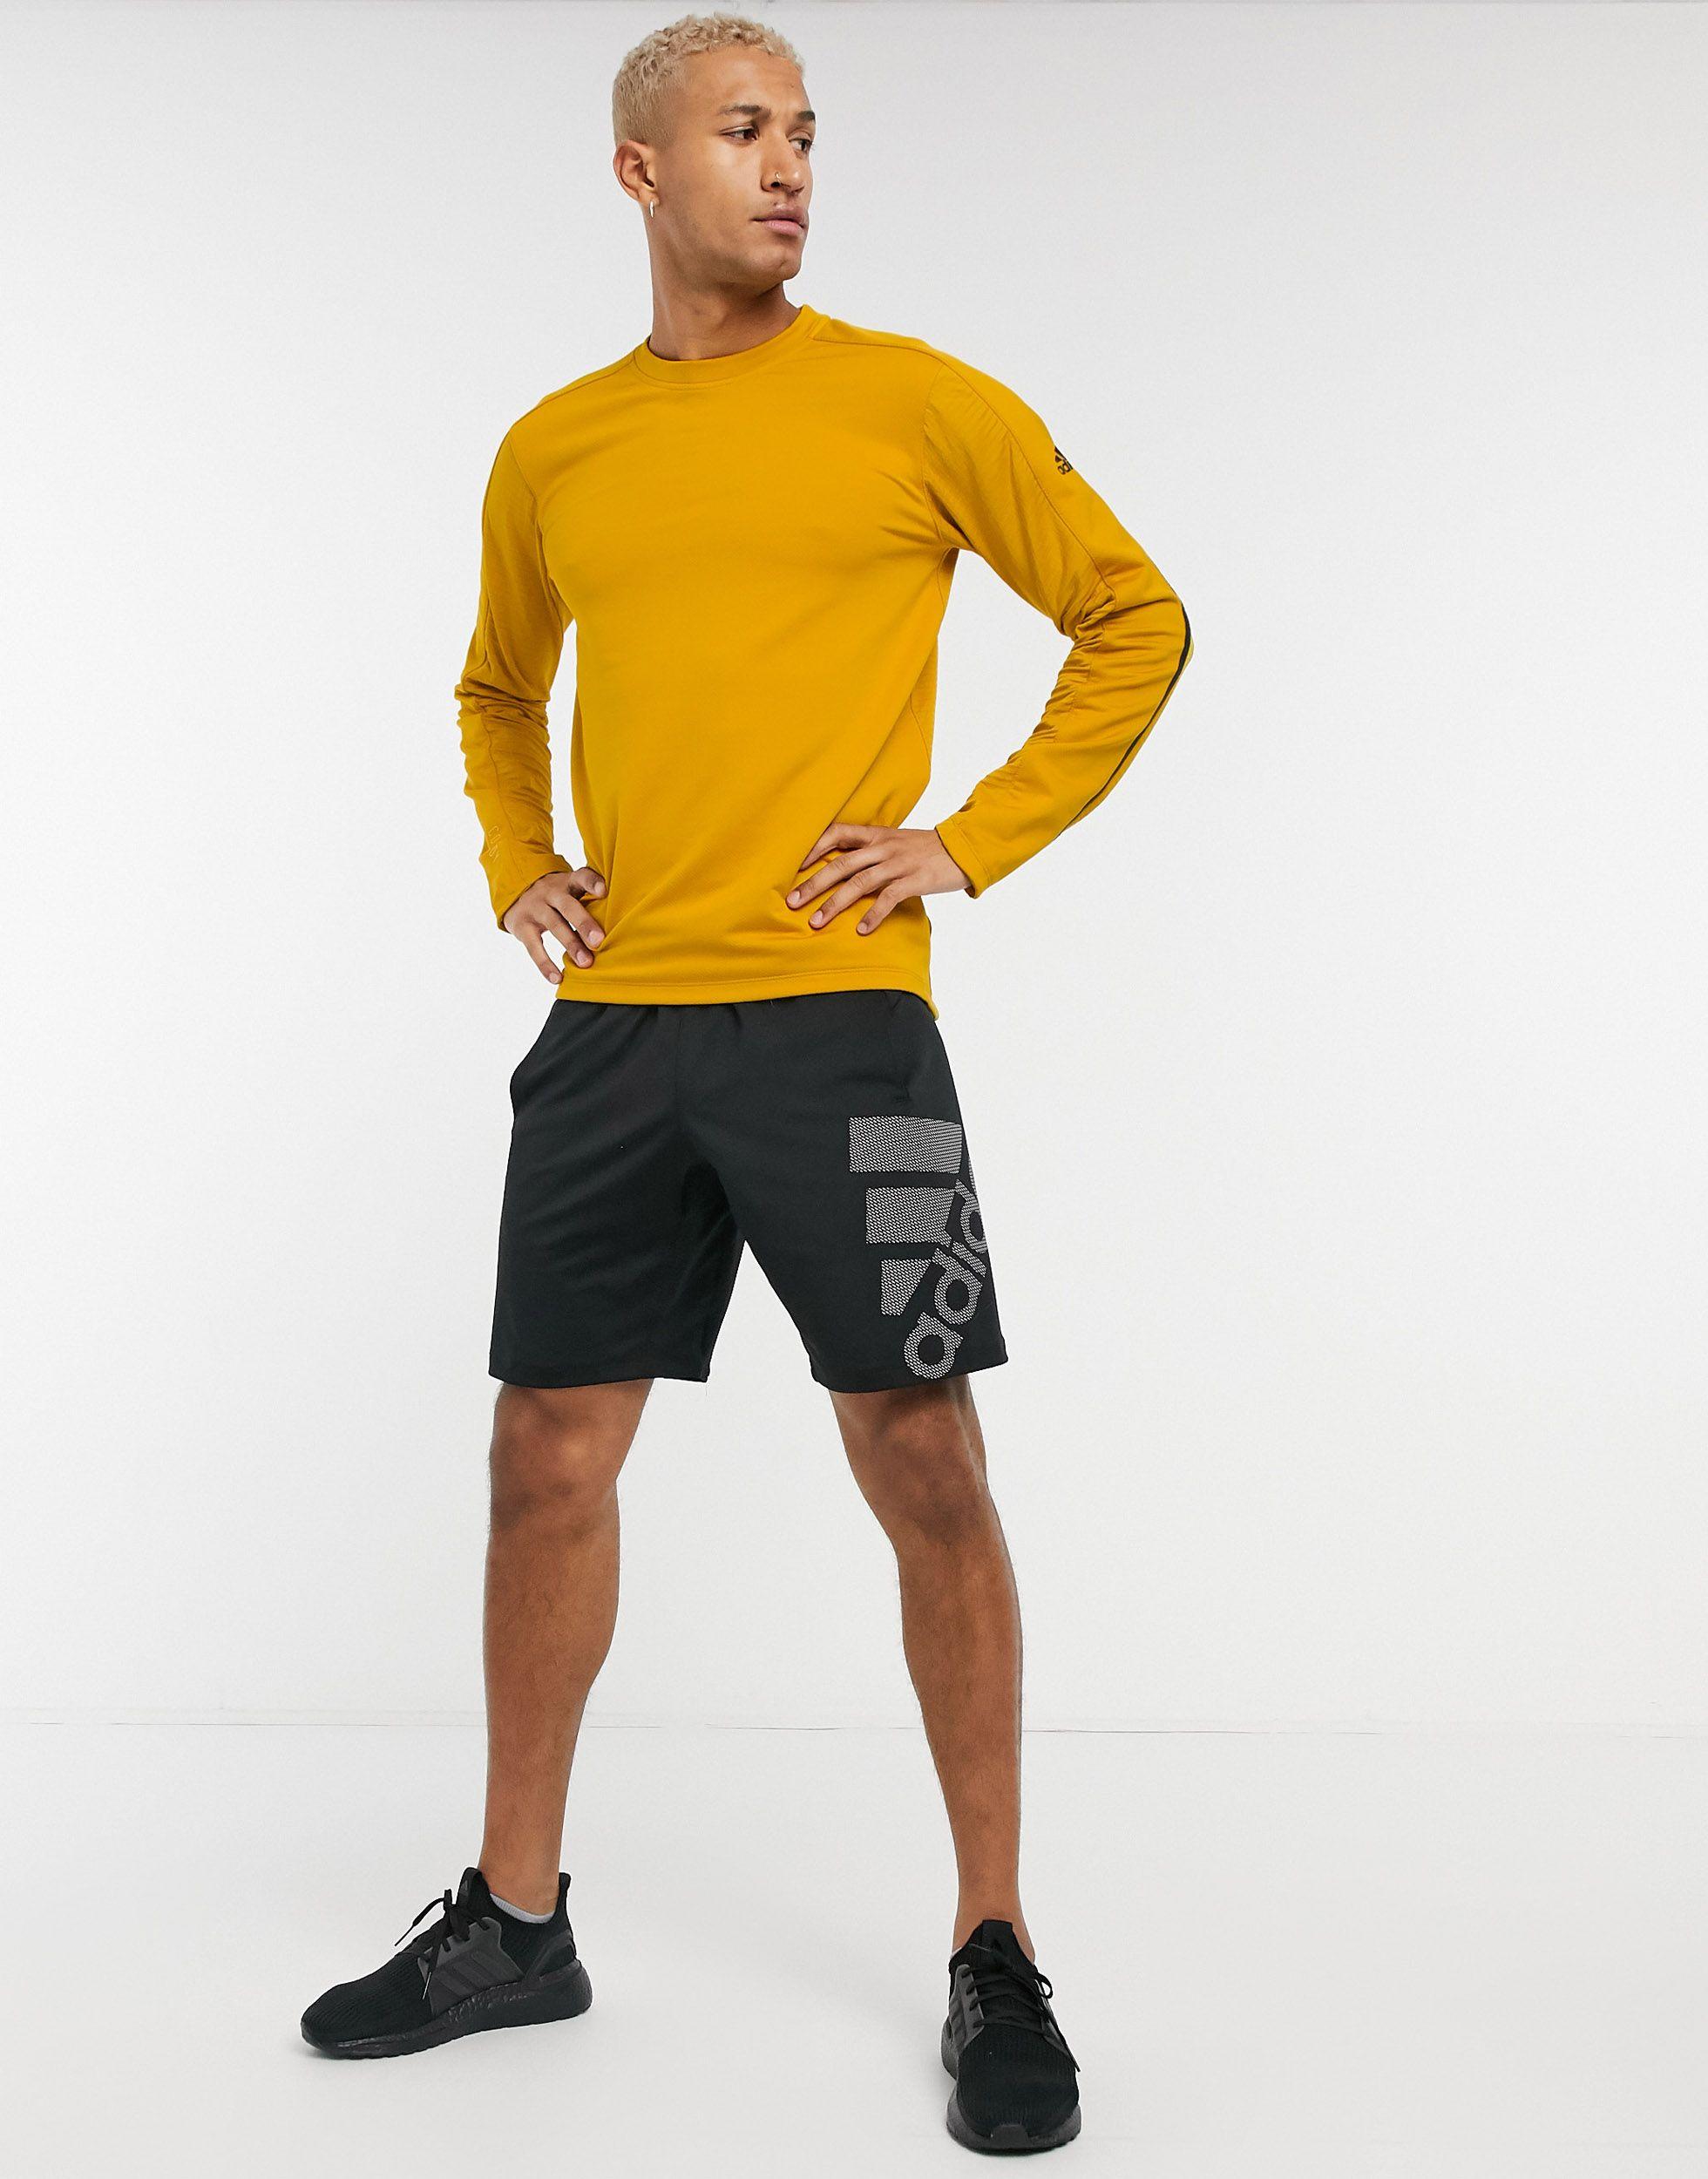 adidas Originals Adidas Training Cold Rdy Long Sleeve Top in Yellow for Men  - Lyst